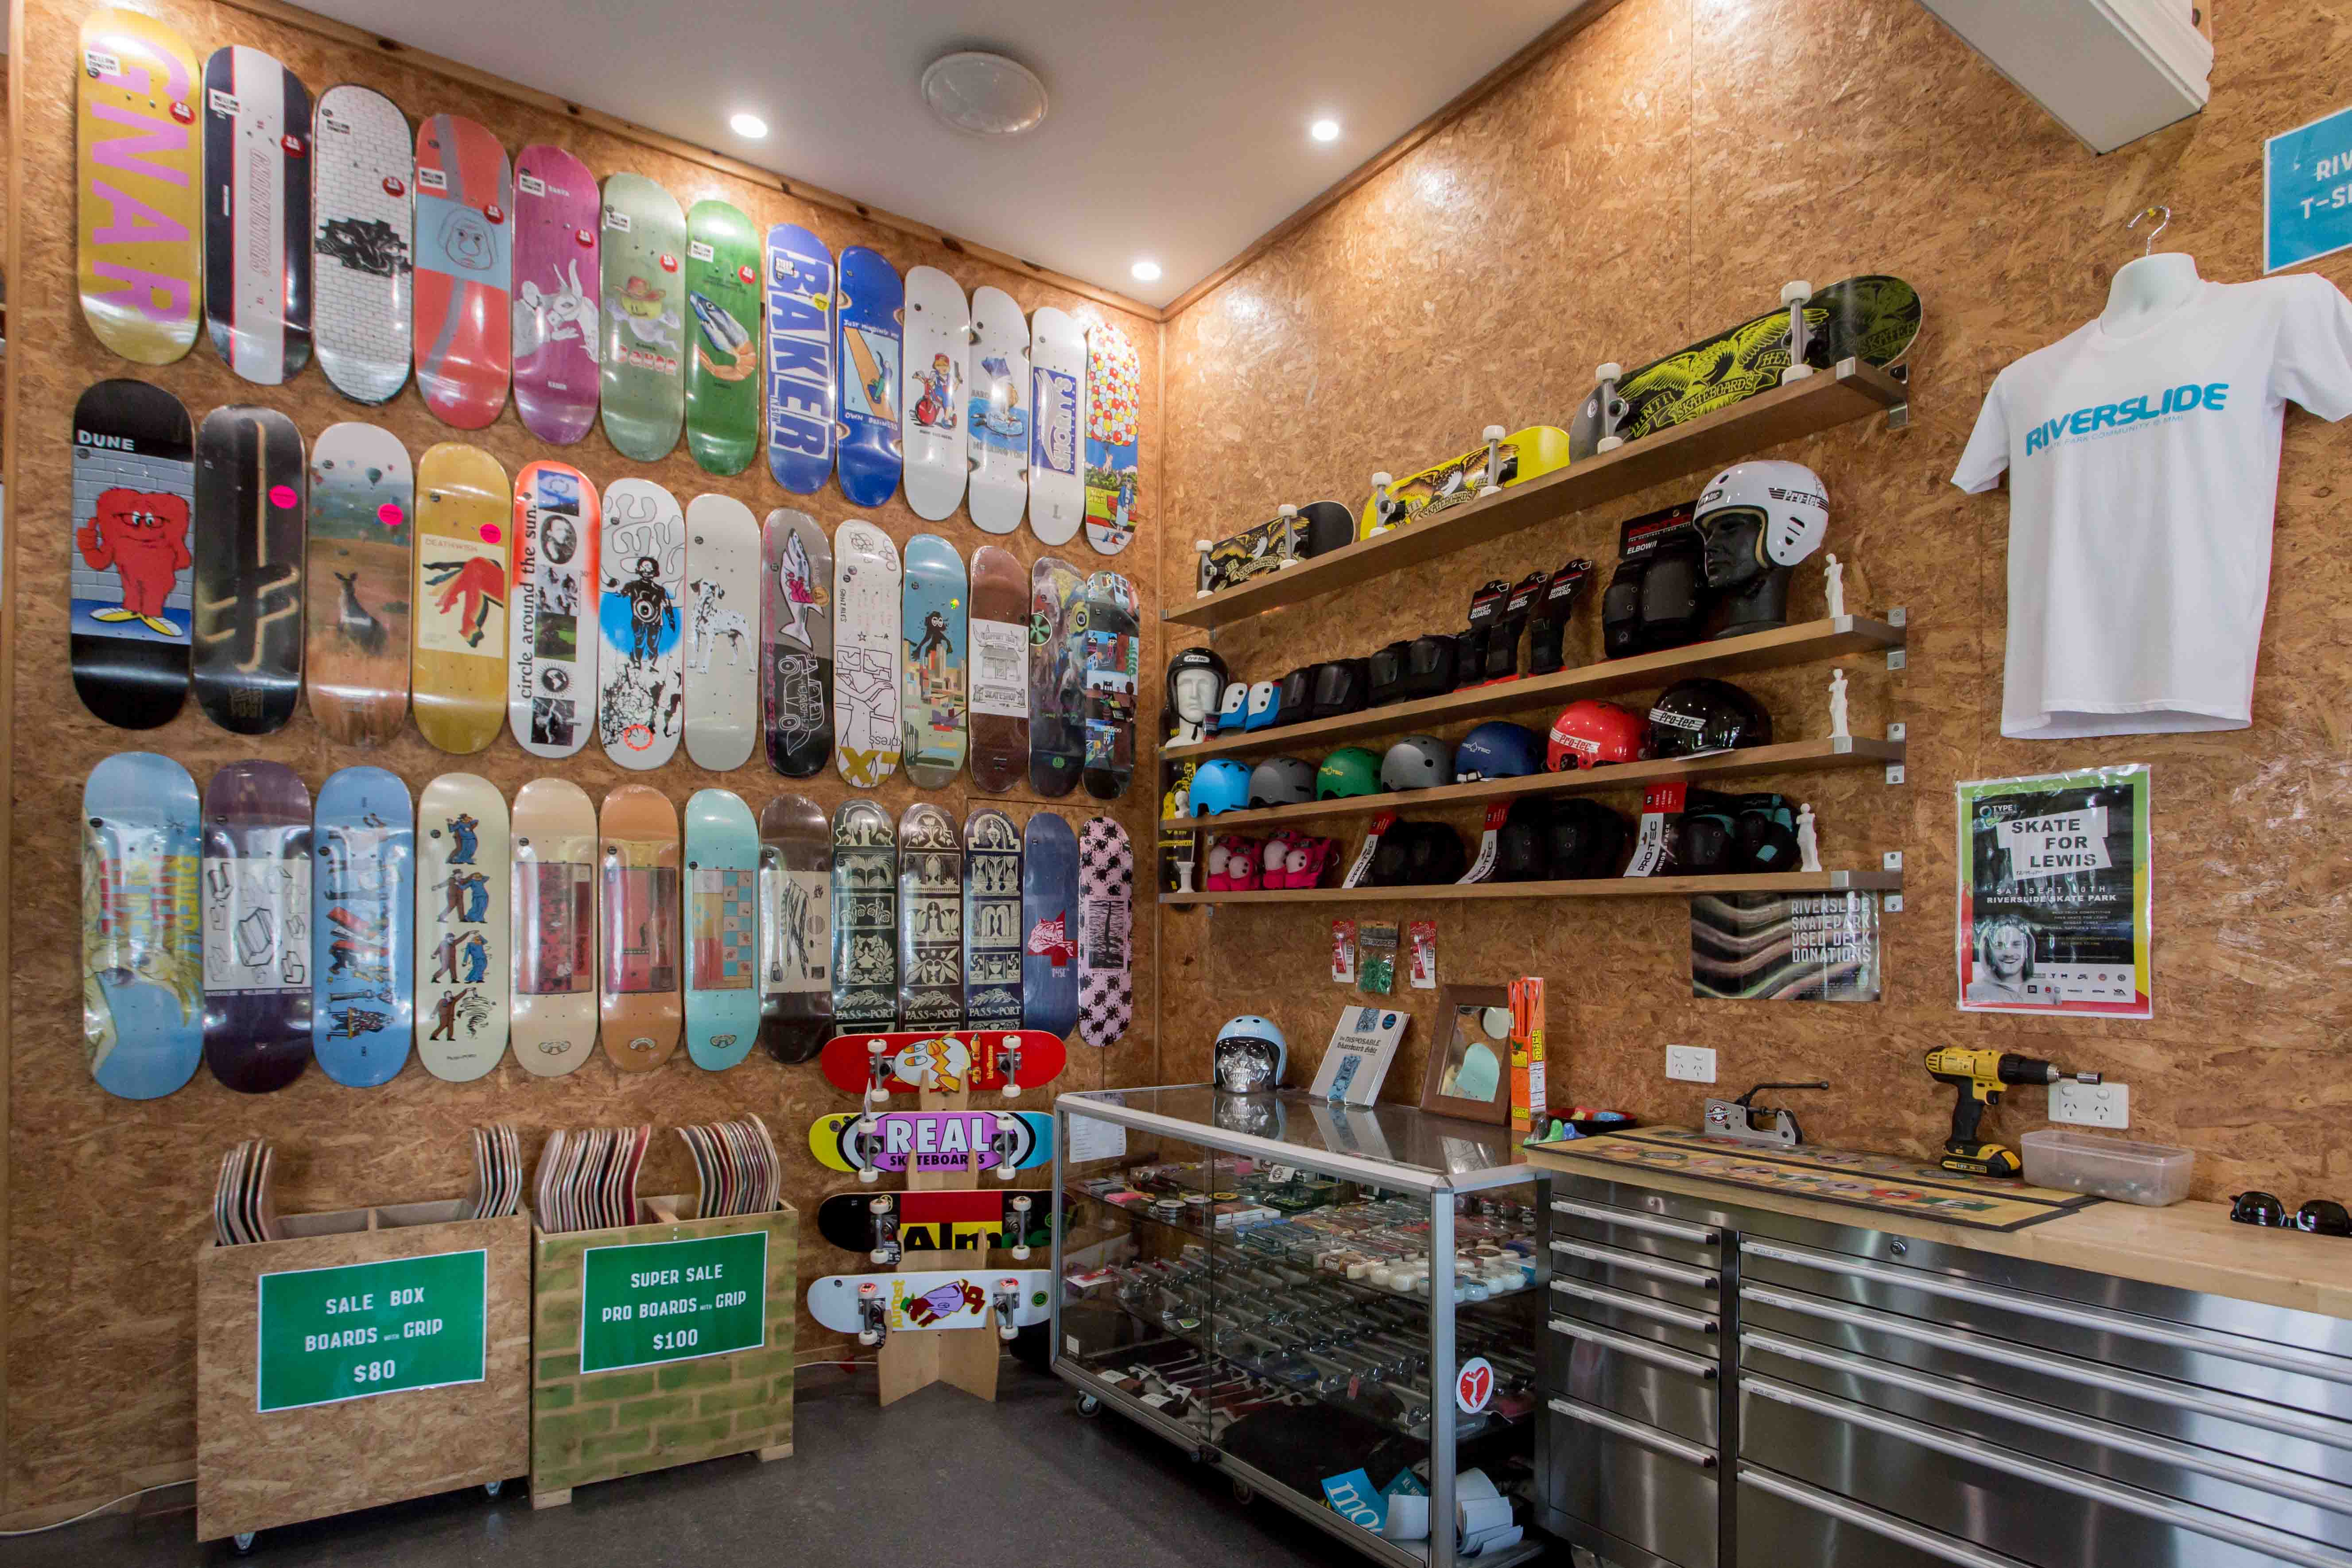 A picture of the Riverslide skate shop